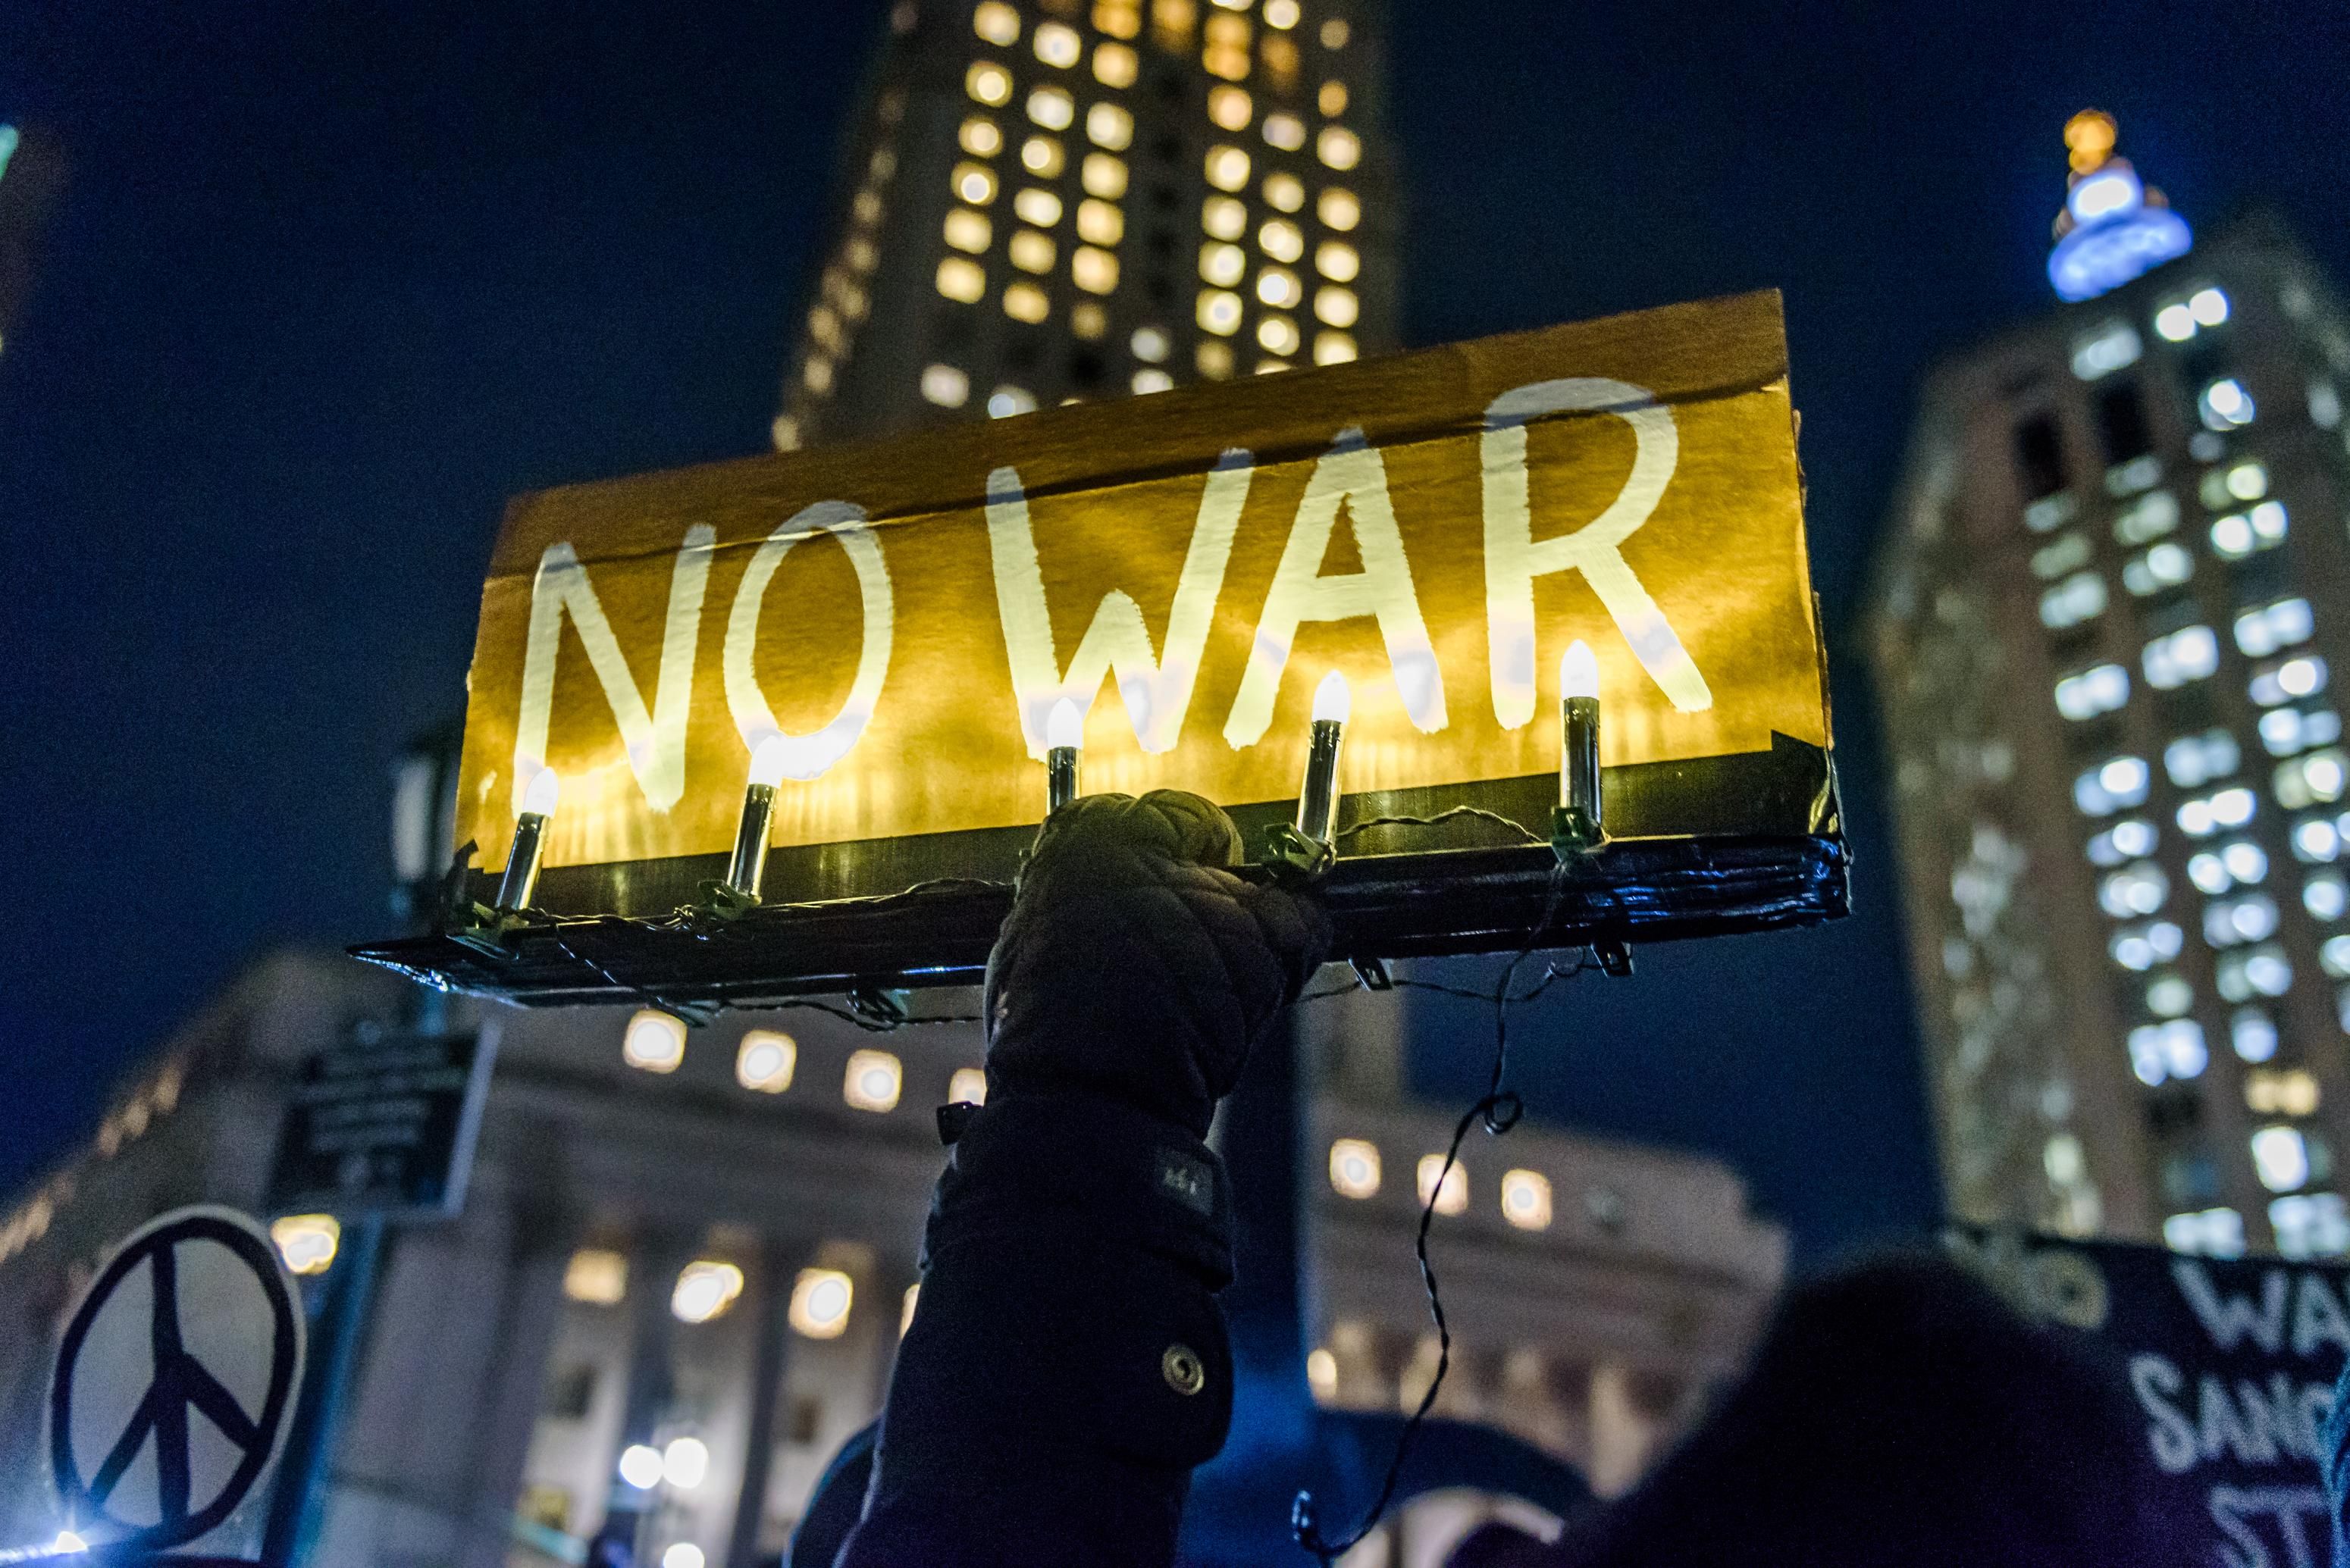 Congressional hearings must be held and the Afghanistan War must end now. (Photo by Erik McGregor/LightRocket via Getty Images)